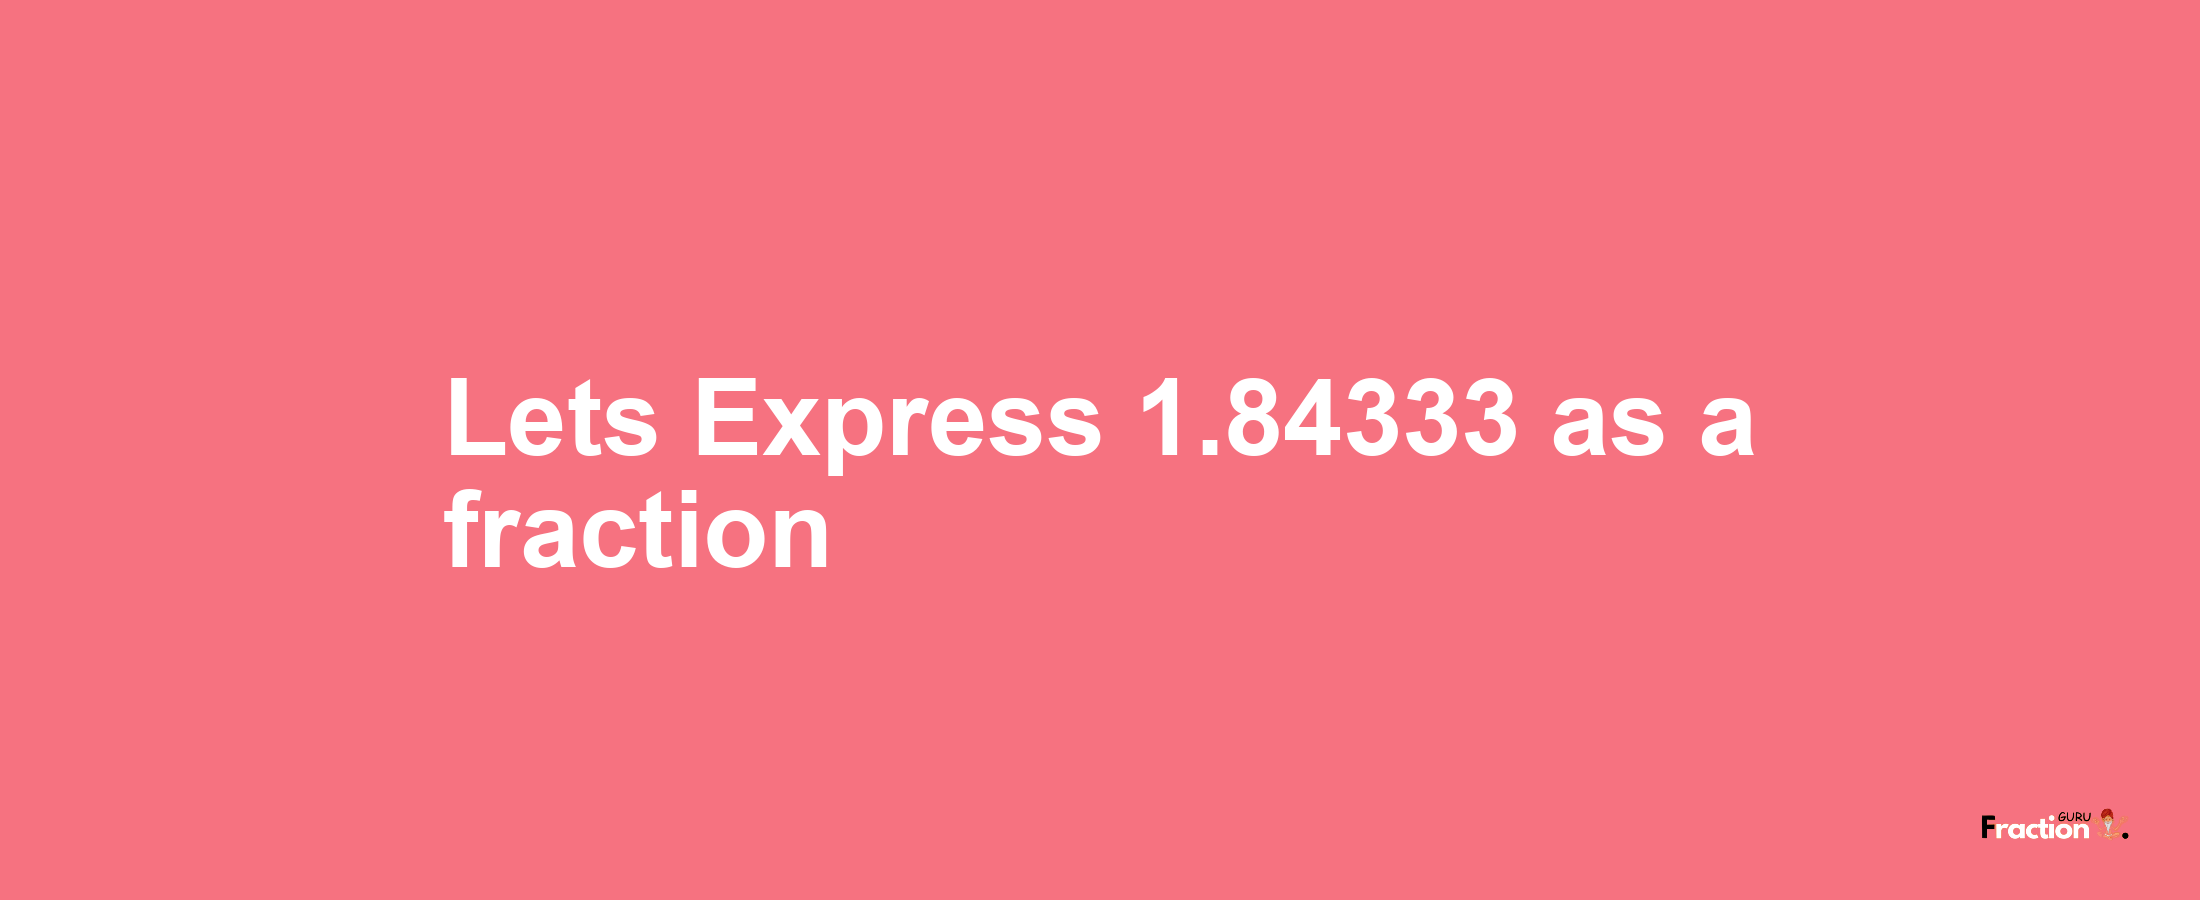 Lets Express 1.84333 as afraction